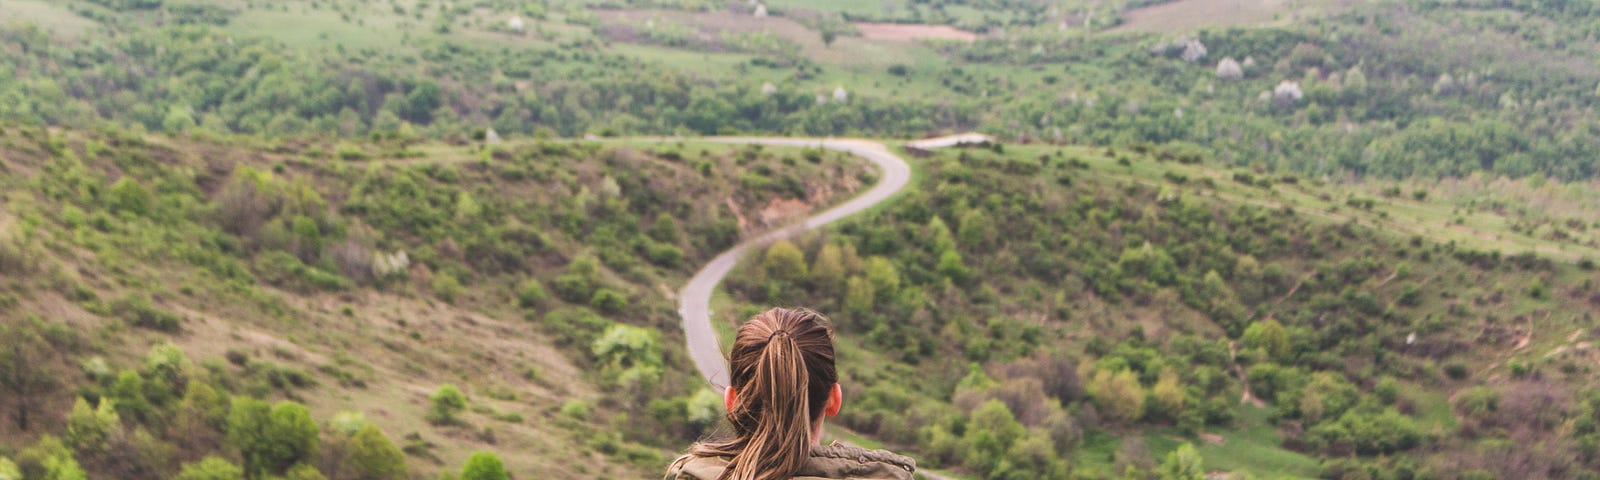 back of a female sitting on a rock overlooking a green, hilly landscape with a narrow road winding through it